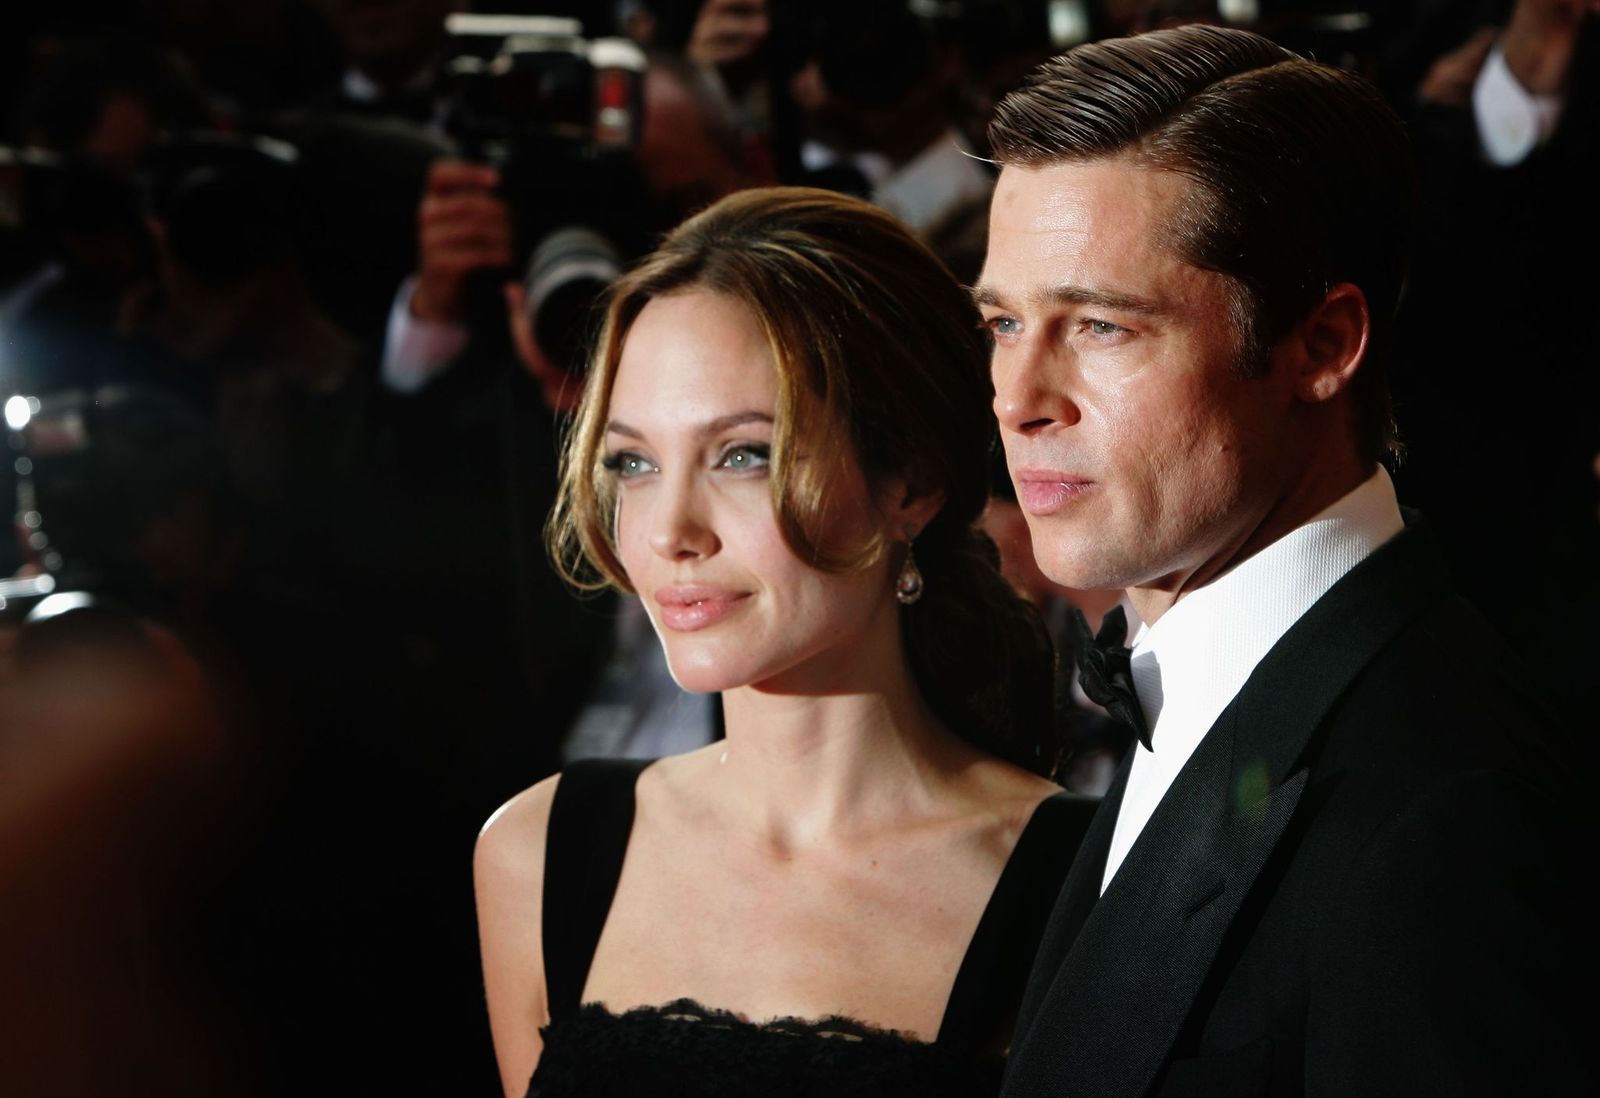 Angelina Jolie and Brad Pitt at the premiere for the film "A Mighty Heart" during the 60th International Cannes Film Festival on May 21, 2007, in France | Photo: Getty Images